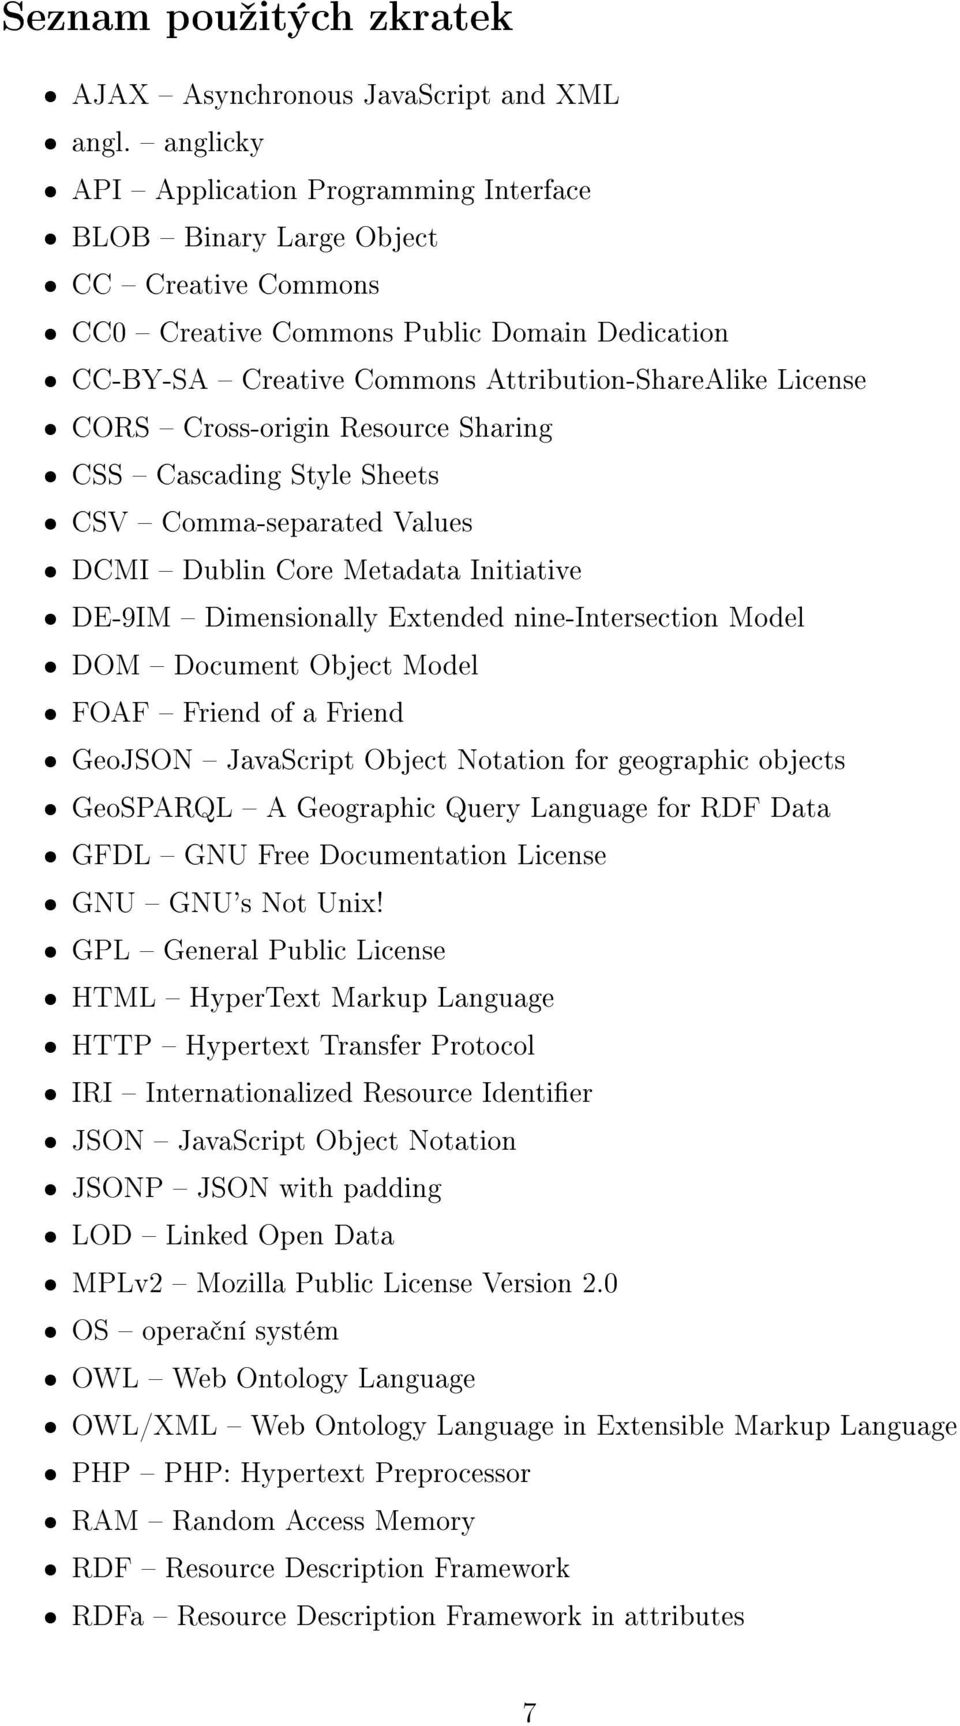 License ˆ CORS Cross-origin Resource Sharing ˆ CSS Cascading Style Sheets ˆ CSV Comma-separated Values ˆ DCMI Dublin Core Metadata Initiative ˆ DE-9IM Dimensionally Extended nine-intersection Model ˆ